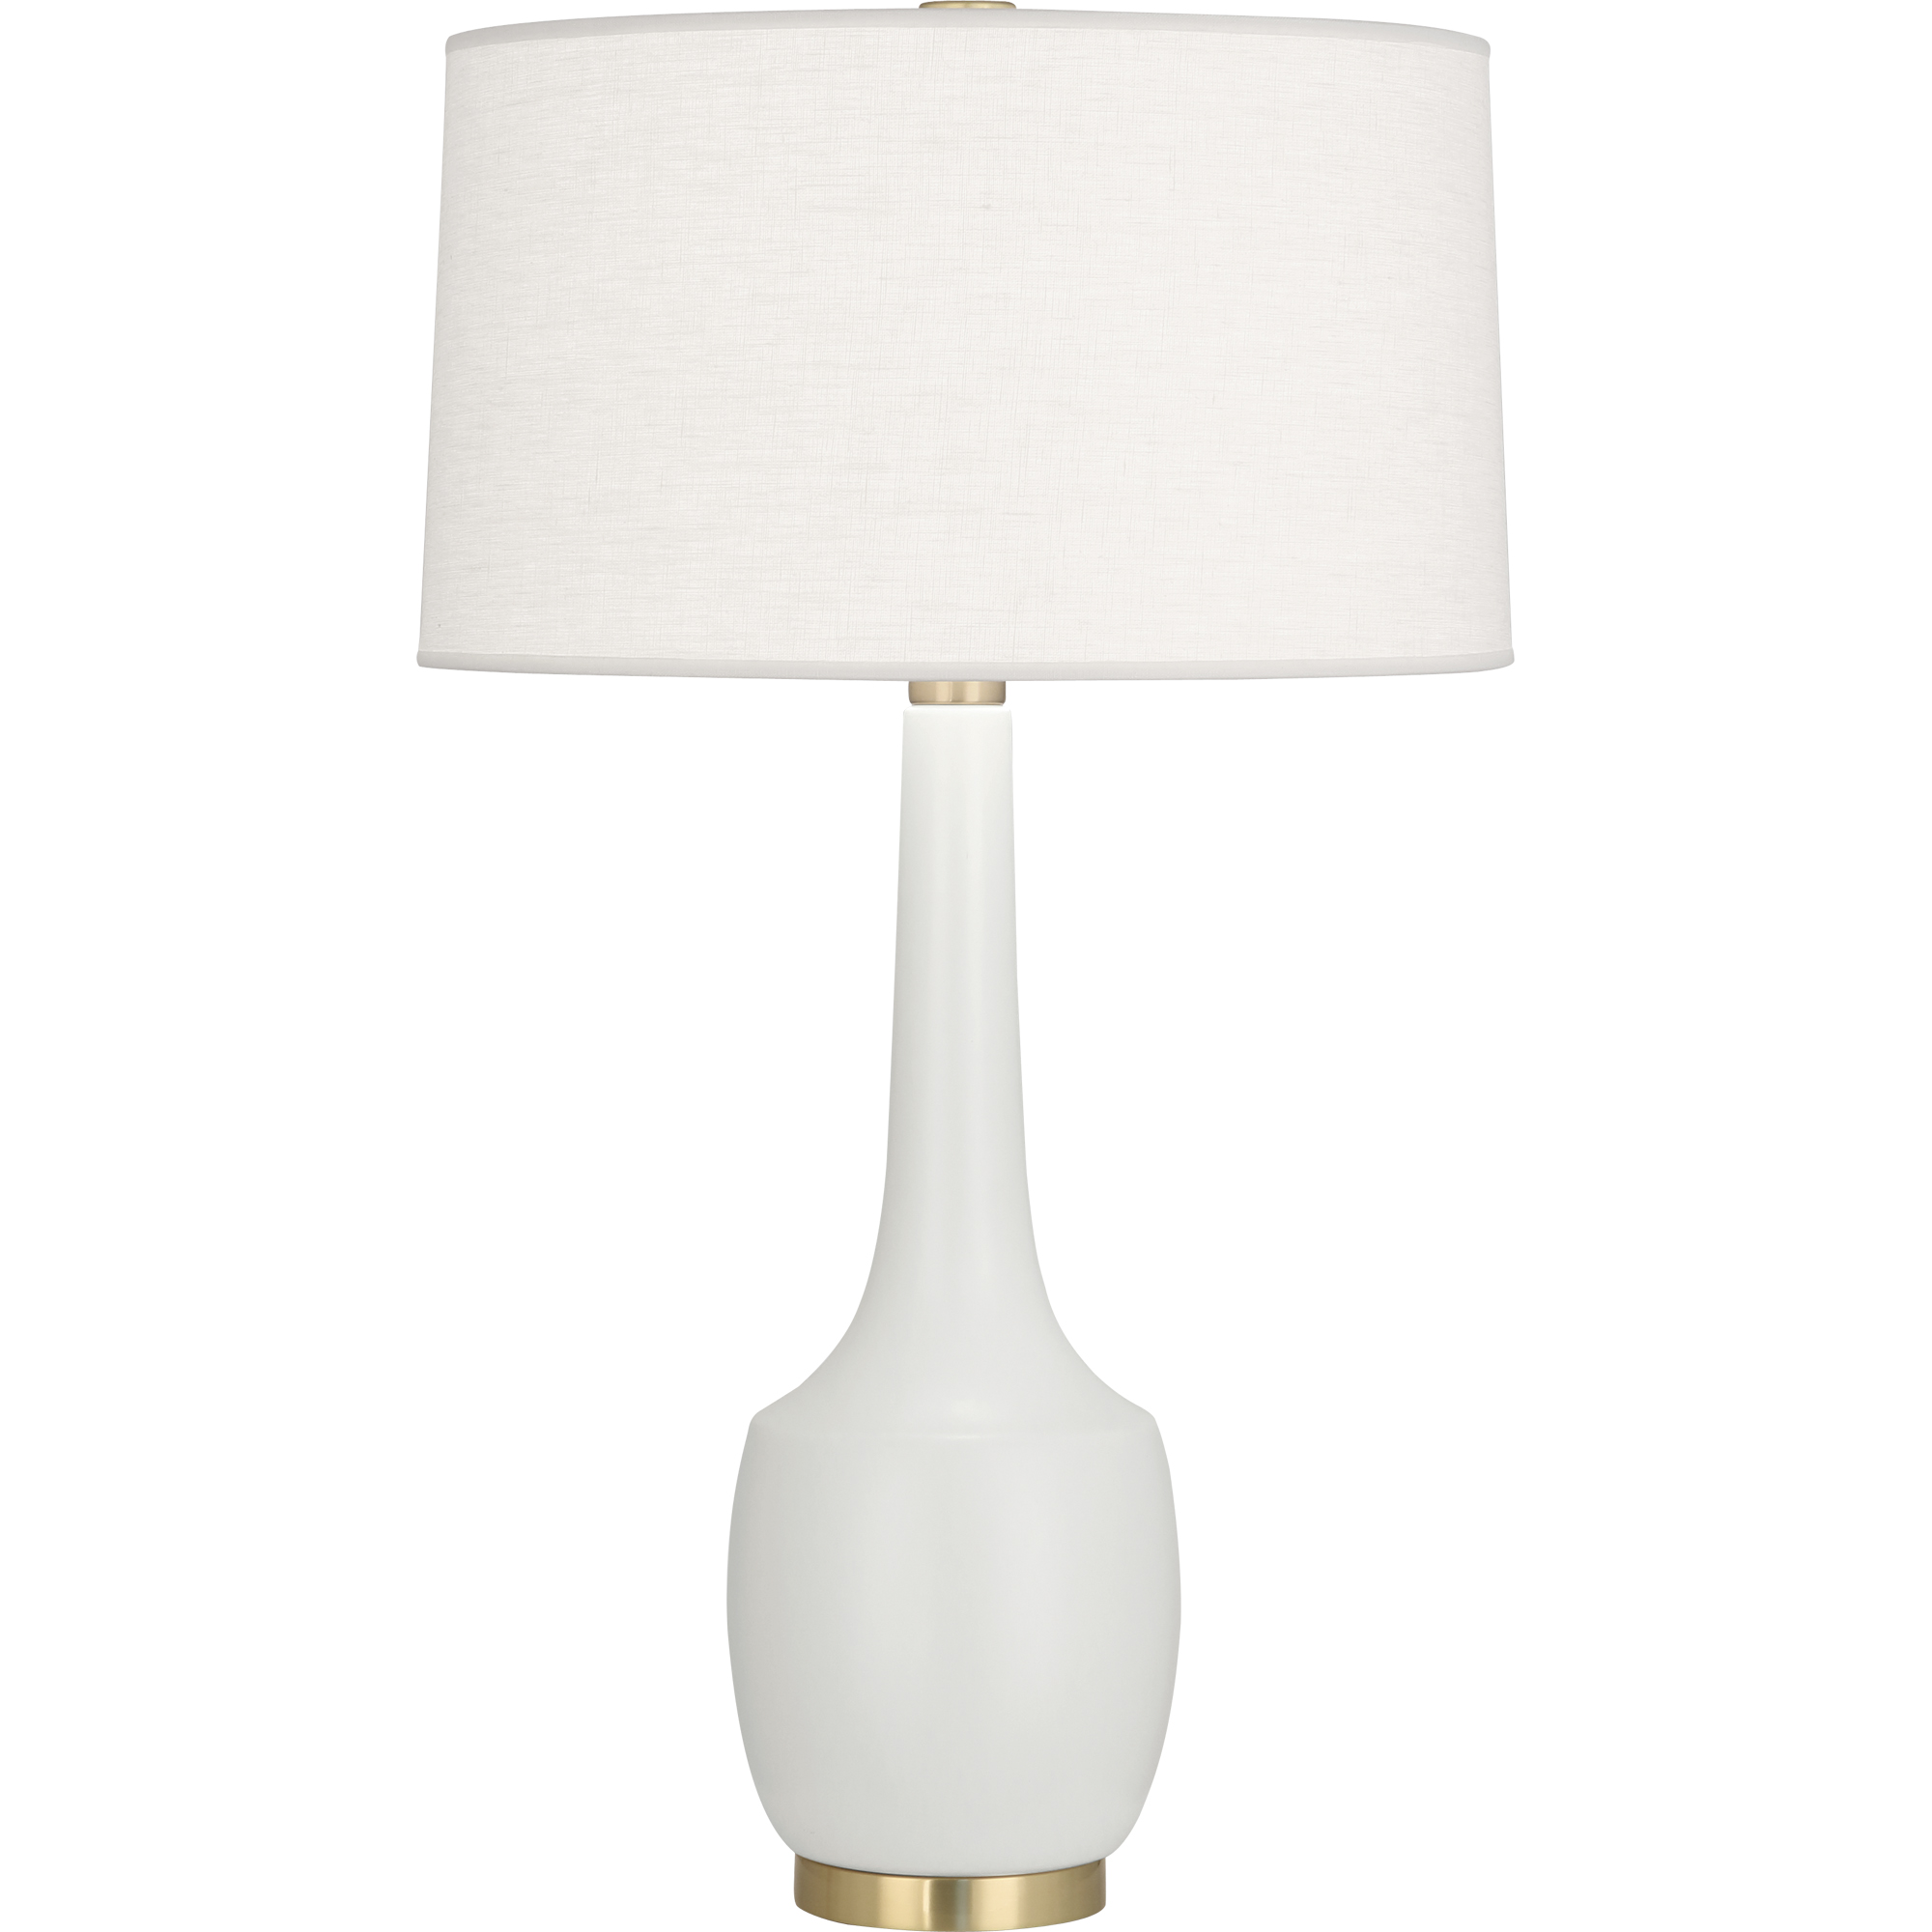 Delilah Table Lamp Style #MLY70